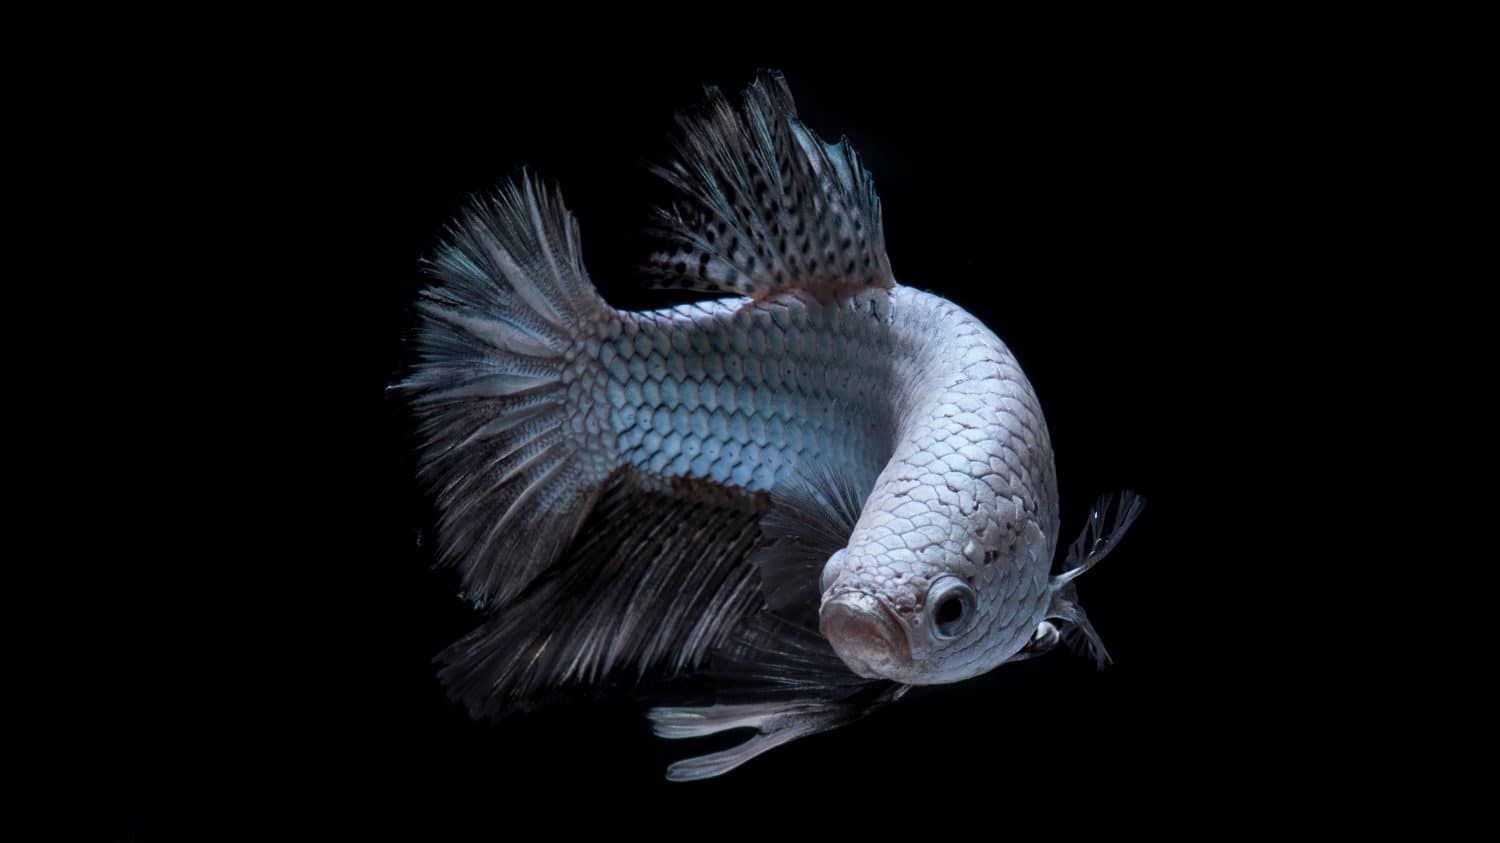 White Betta siamese (fighting fish) on black background, marine animal species specific in Thailand and countries around south east Asia